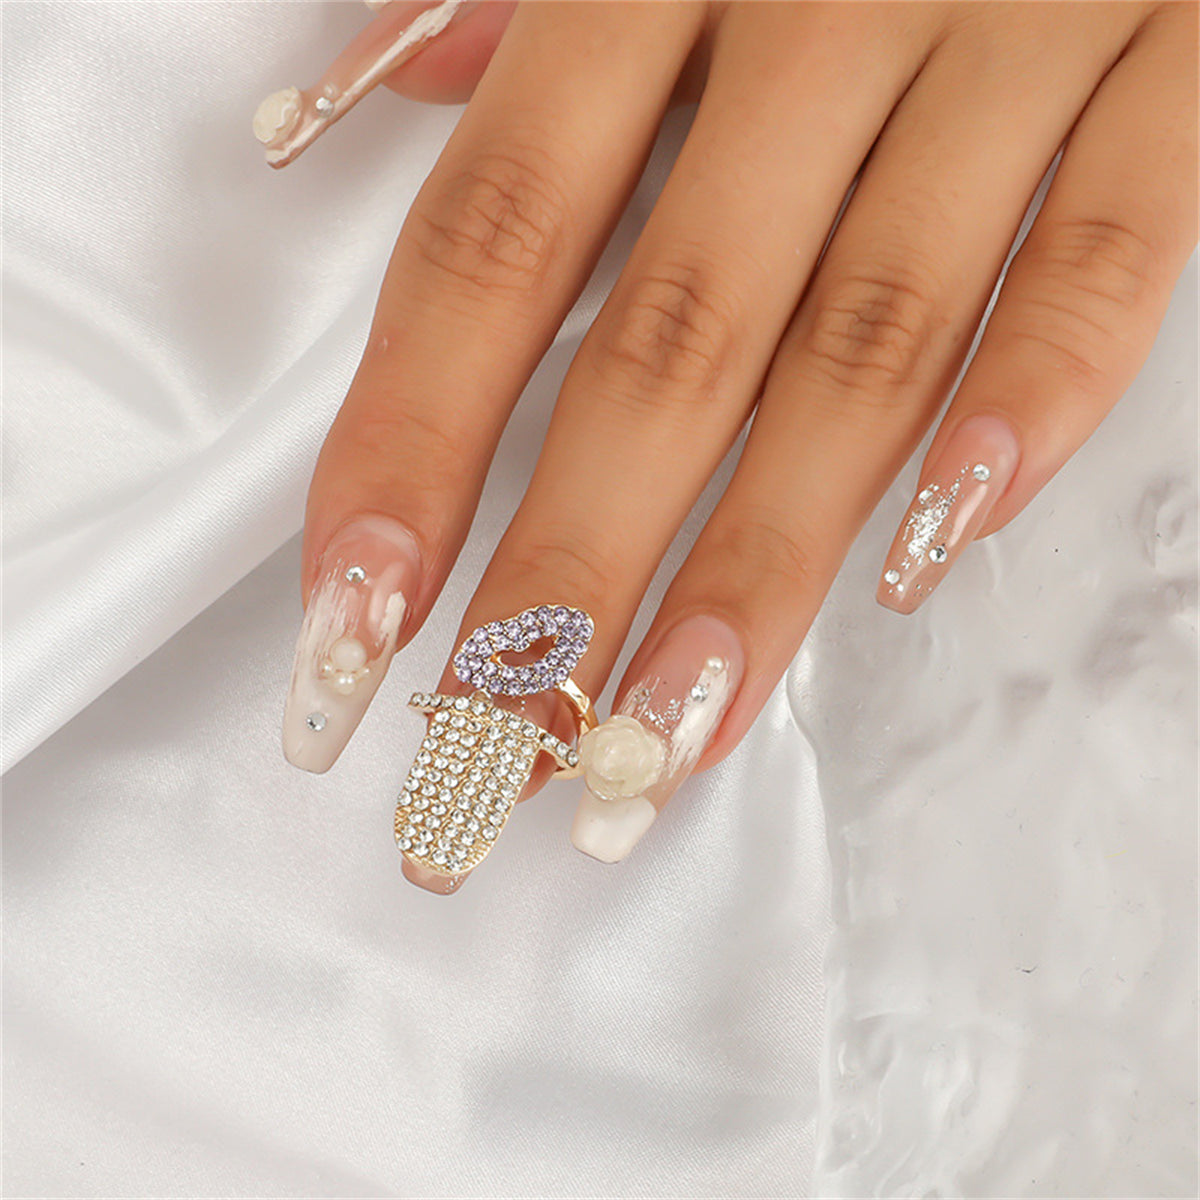 Cubic Zirconia & 18K Gold-Plated Lip Bypass Midi Ring